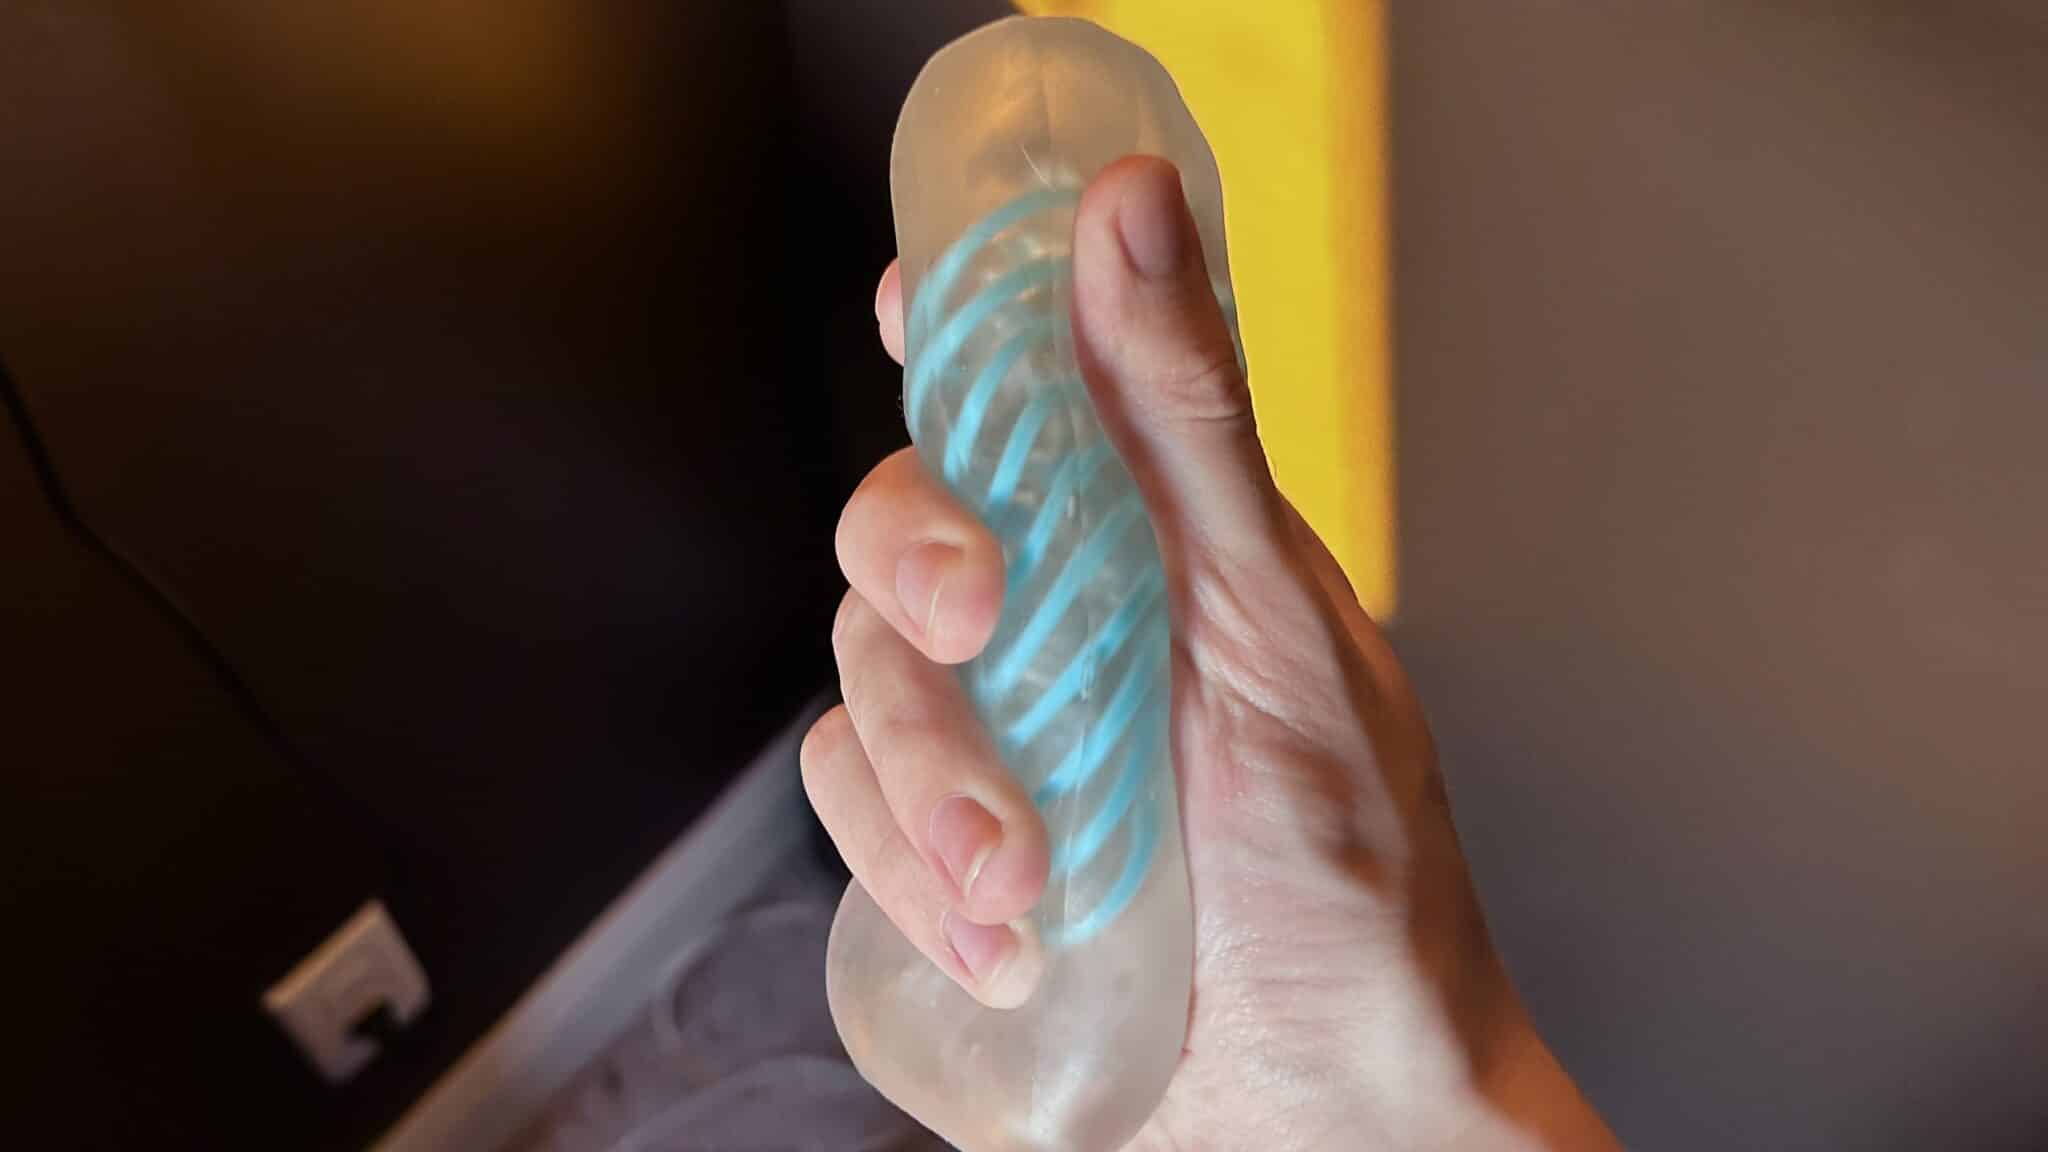 Tenga Spinner Tetra Material and care guide